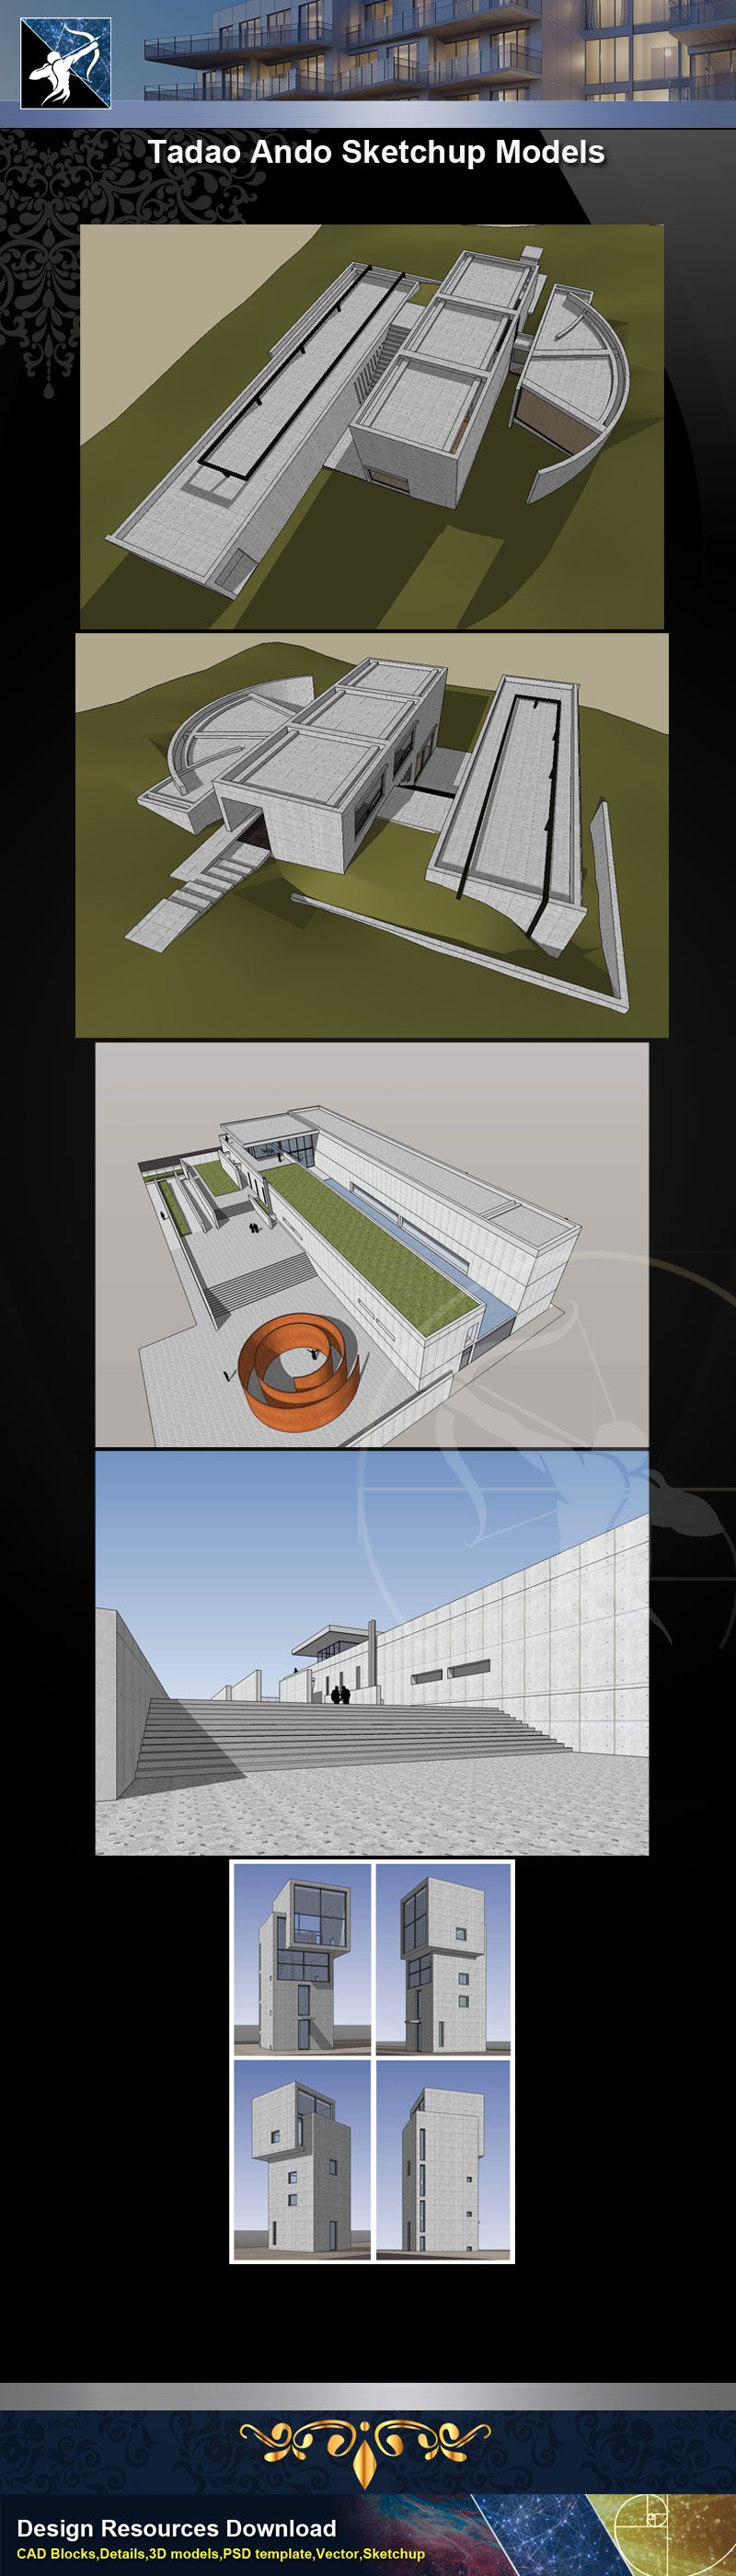 ★★Famous Architecture -Tadao Ando Sketchup 3D Models